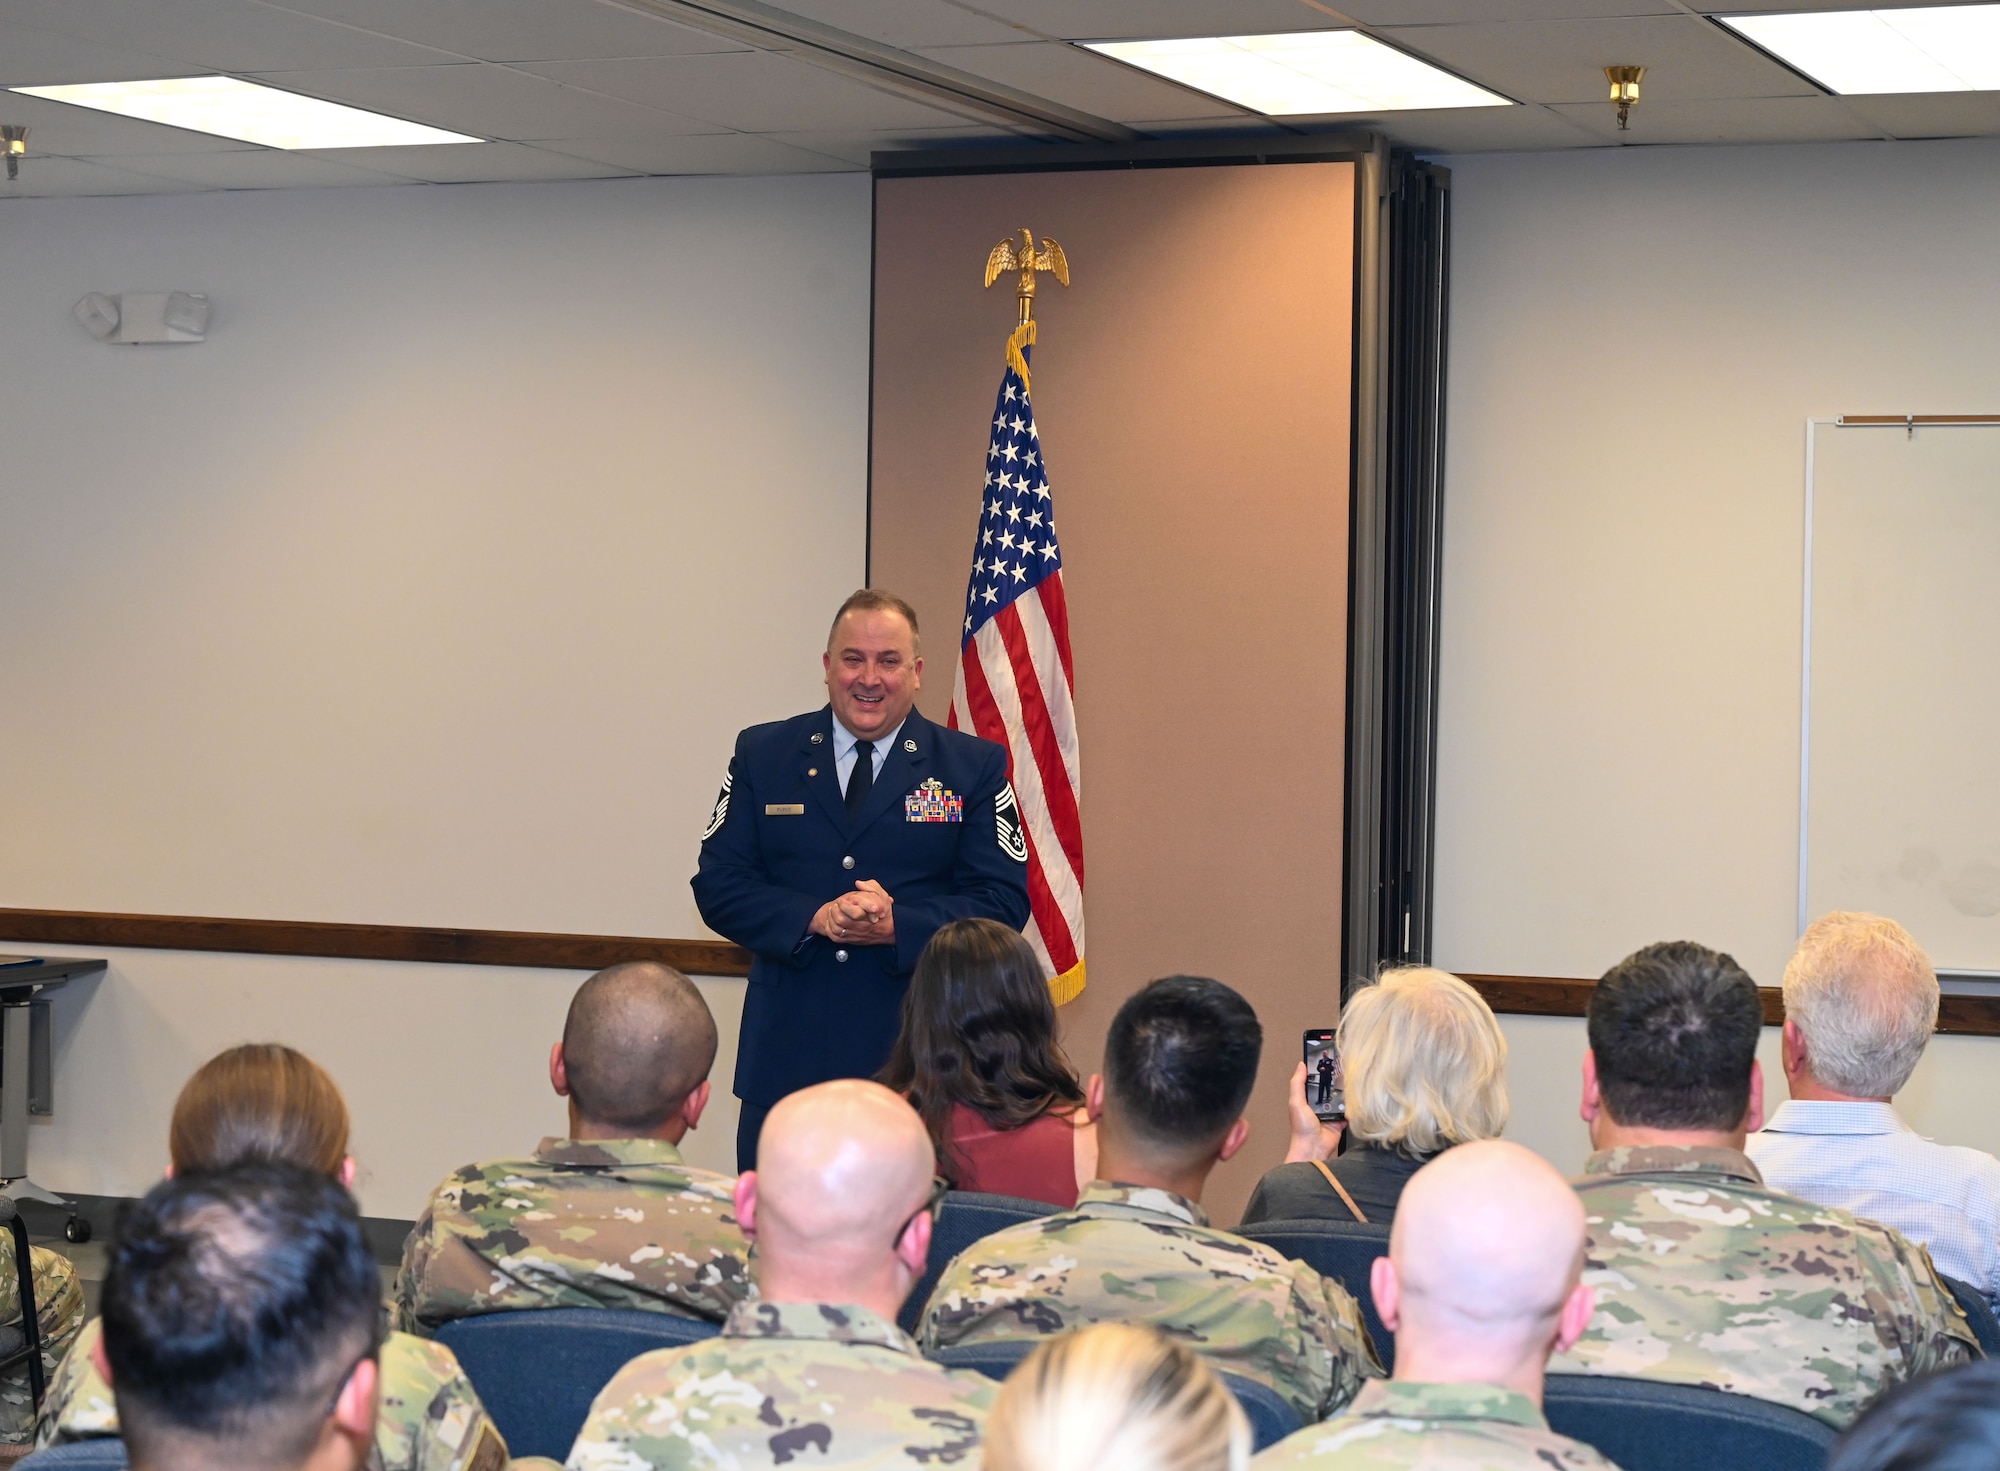 Chief Master Sgt. Steven Purvis, former 74th Aerial Port Squadron superintendent, gives closing remarks during a ceremony in San Antonio, Texas, Jan. 6, 2024. The 74th APS is responsible for the full spectrum logistics, operations, programs and exercise support for the 433rd Airlift Wing. Purvis retired with more than 30 years of military service. (U.S. Air Force photo by Staff Sgt. Adriana Barrientos)